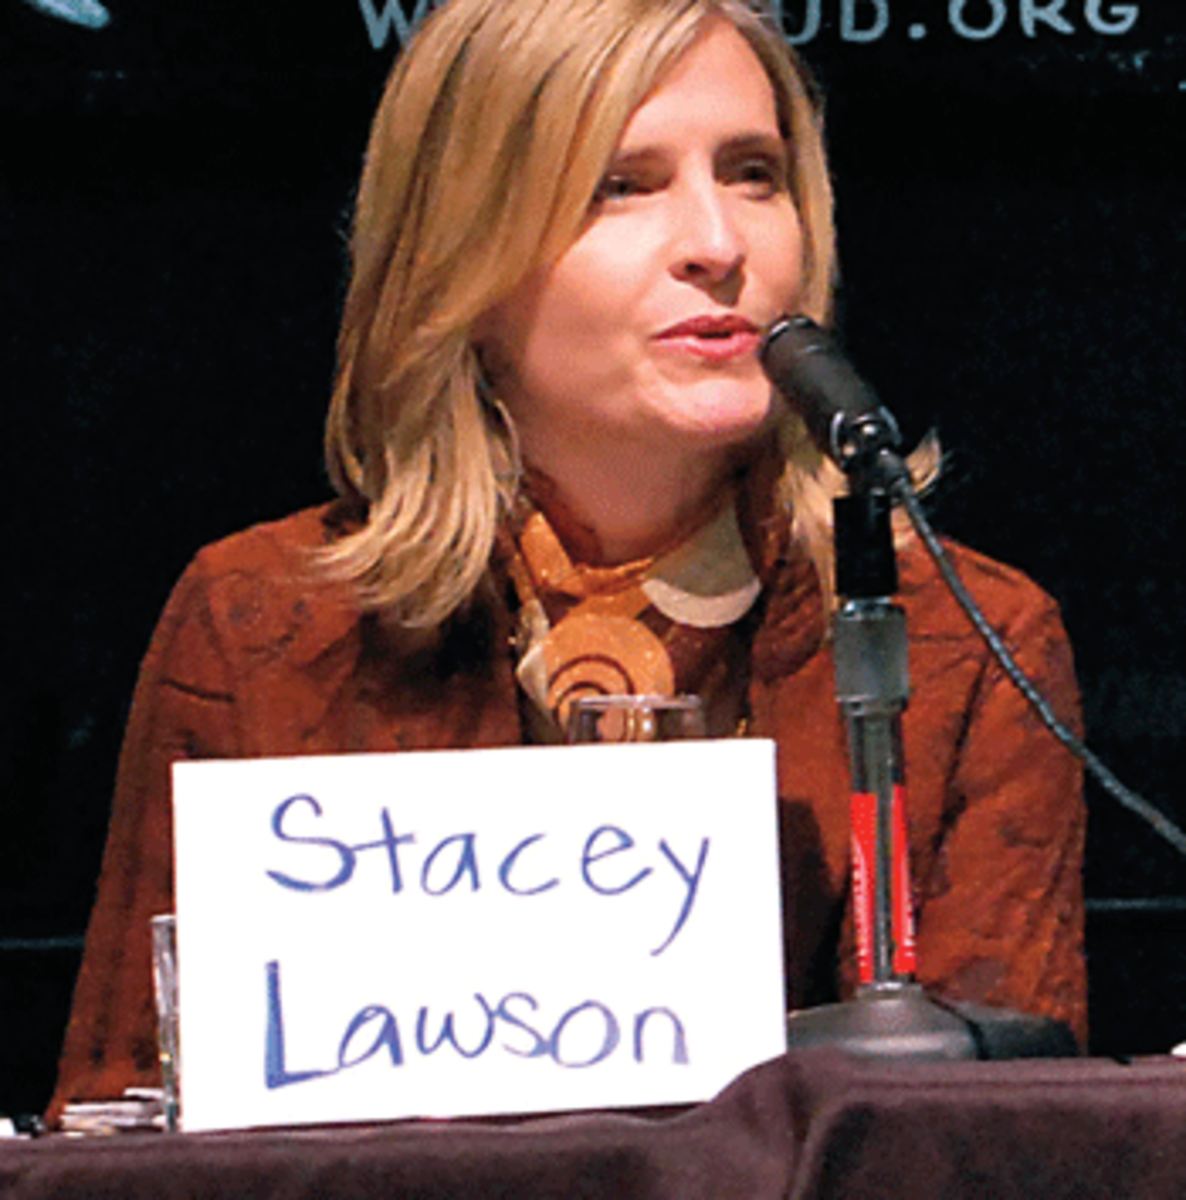 stacey lawson